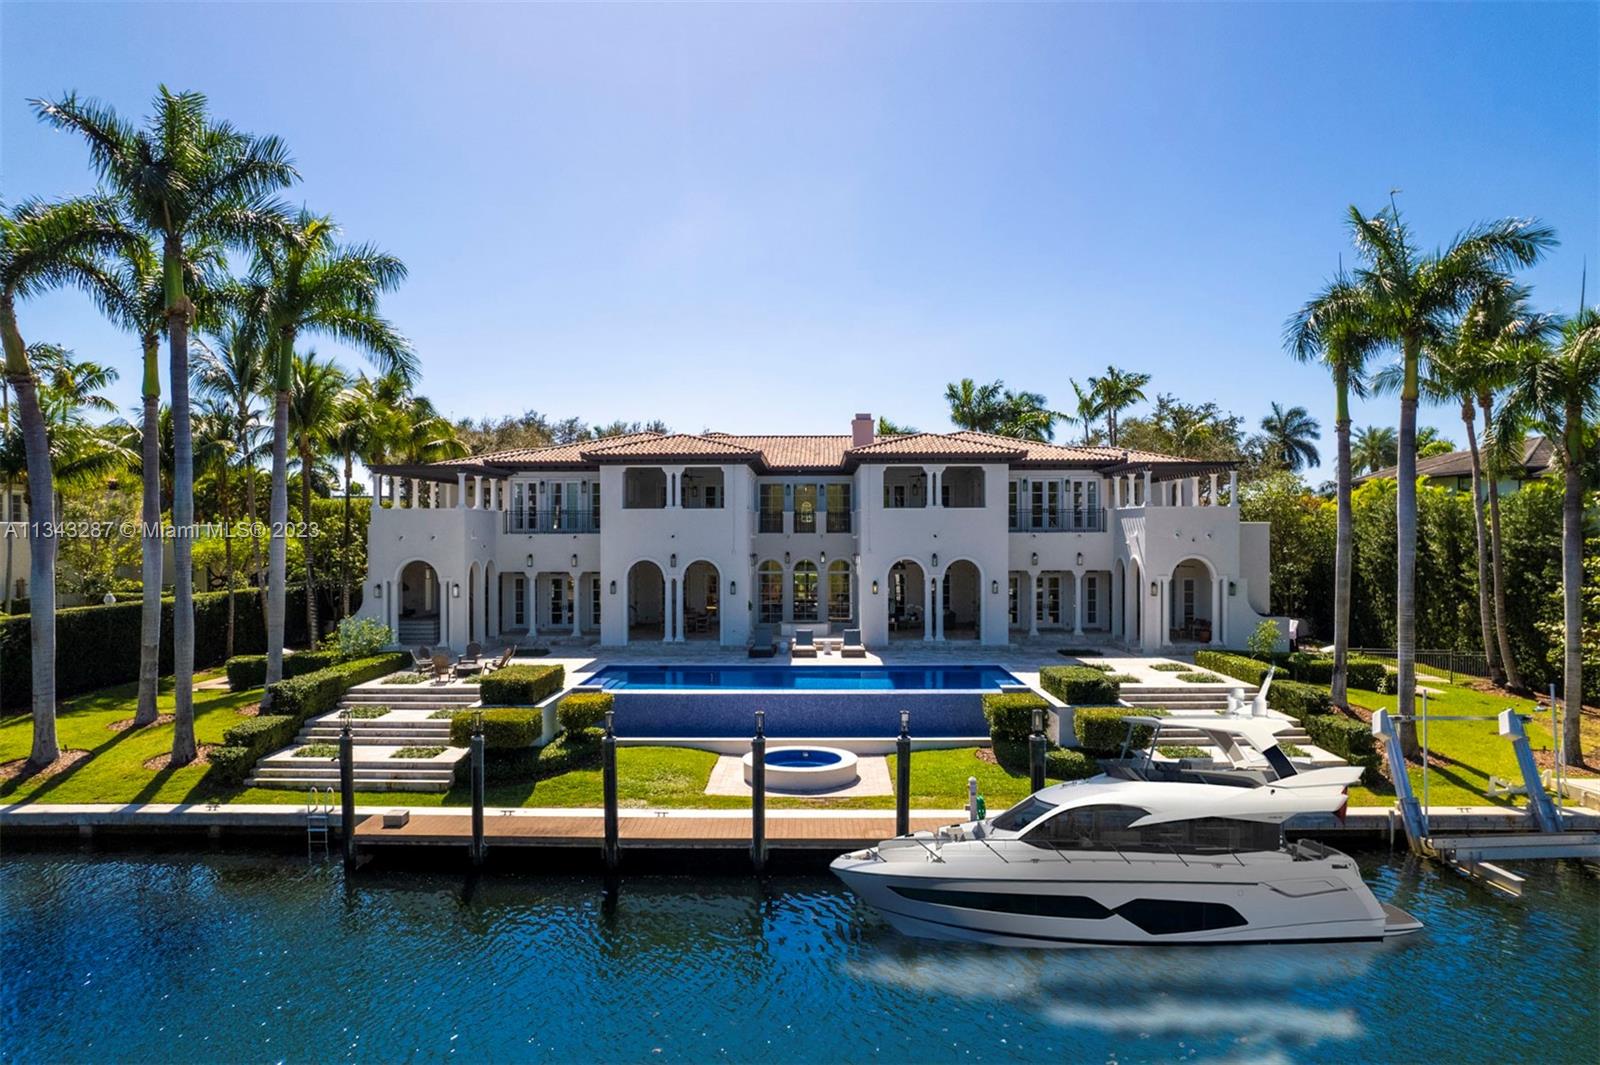 This exquisite 11,946 sq ft waterfront property, located in the highly sought-after Gables Estates, sits on an expansive lot with 180 ft of waterfrontage. Boasting 8 BR, 3 half BA, this impressive mansion is a work of art. The main suite features a private balcony, 2 walk-in closets, and luxurious spa-like bathroom. The home's open floor plan seamlessly connects the living, dining, and kitchen areas, making it ideal for both casual family living and large-scale entertaining. Outside, the property is beautifully landscaped and features cabana with sauna room, covered terraces, a summer kitchen, and a large infinity-edge pool. The home also has a private dock, making it easy to enjoy water activities right from your backyard. This home is sure to impress even the most discerning buyers.